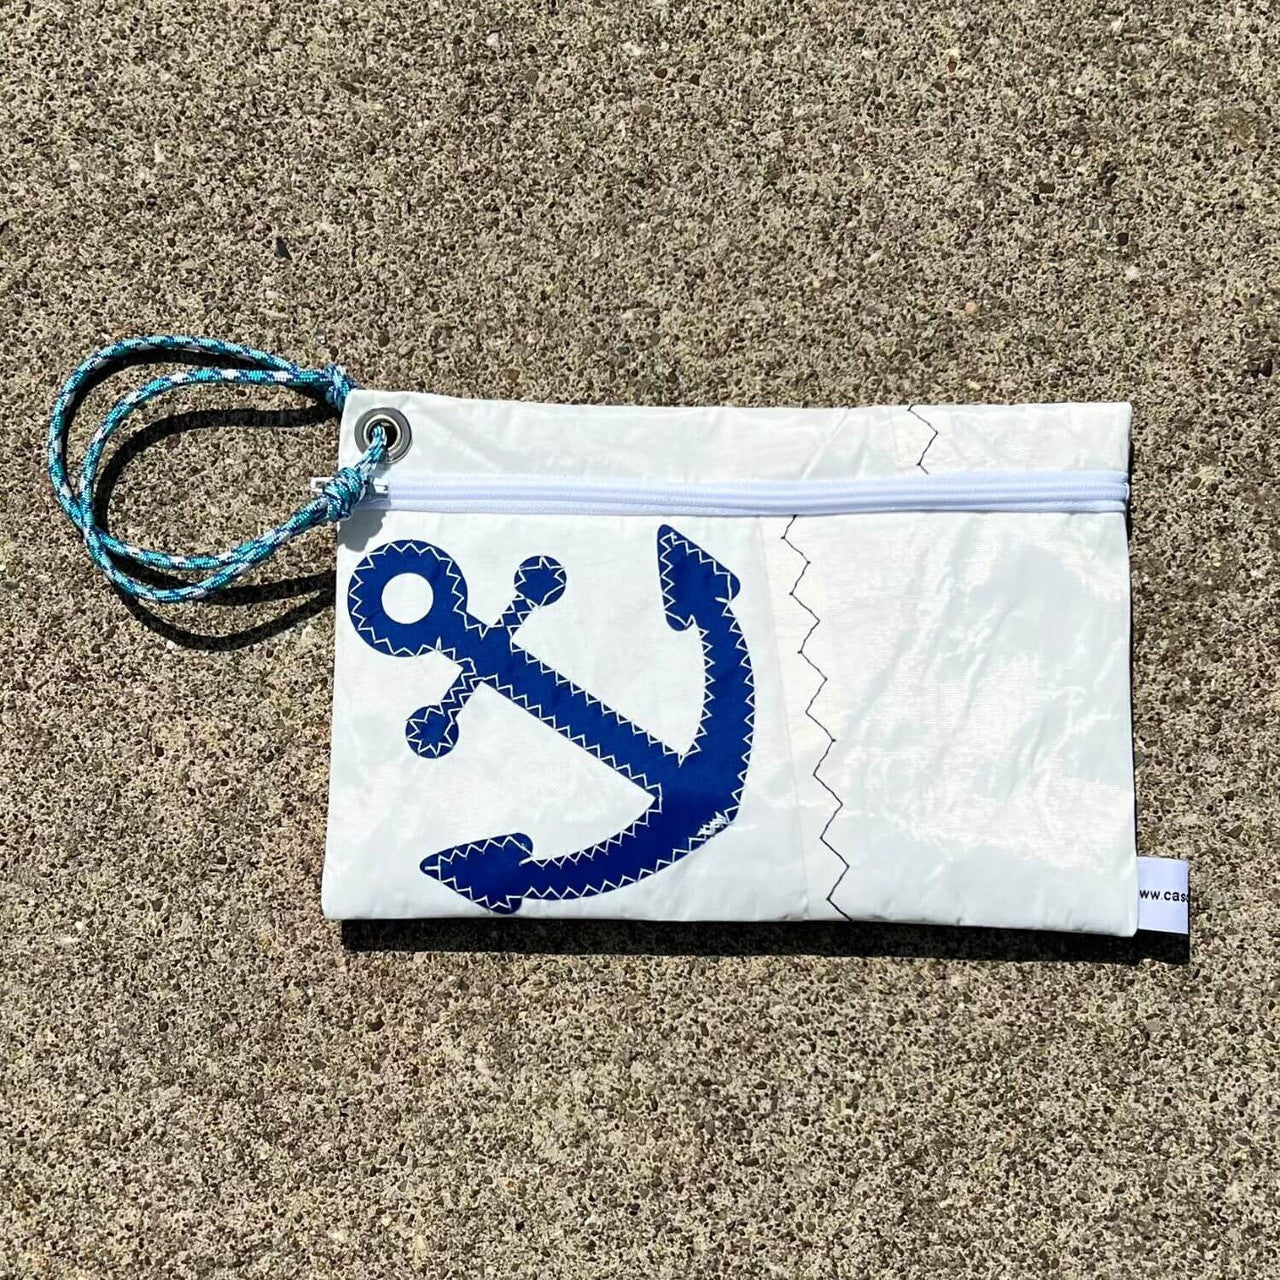 Recycled Sail Wristlet Handbags, Wallets & Cases New England Trading Co Blue Anchor  